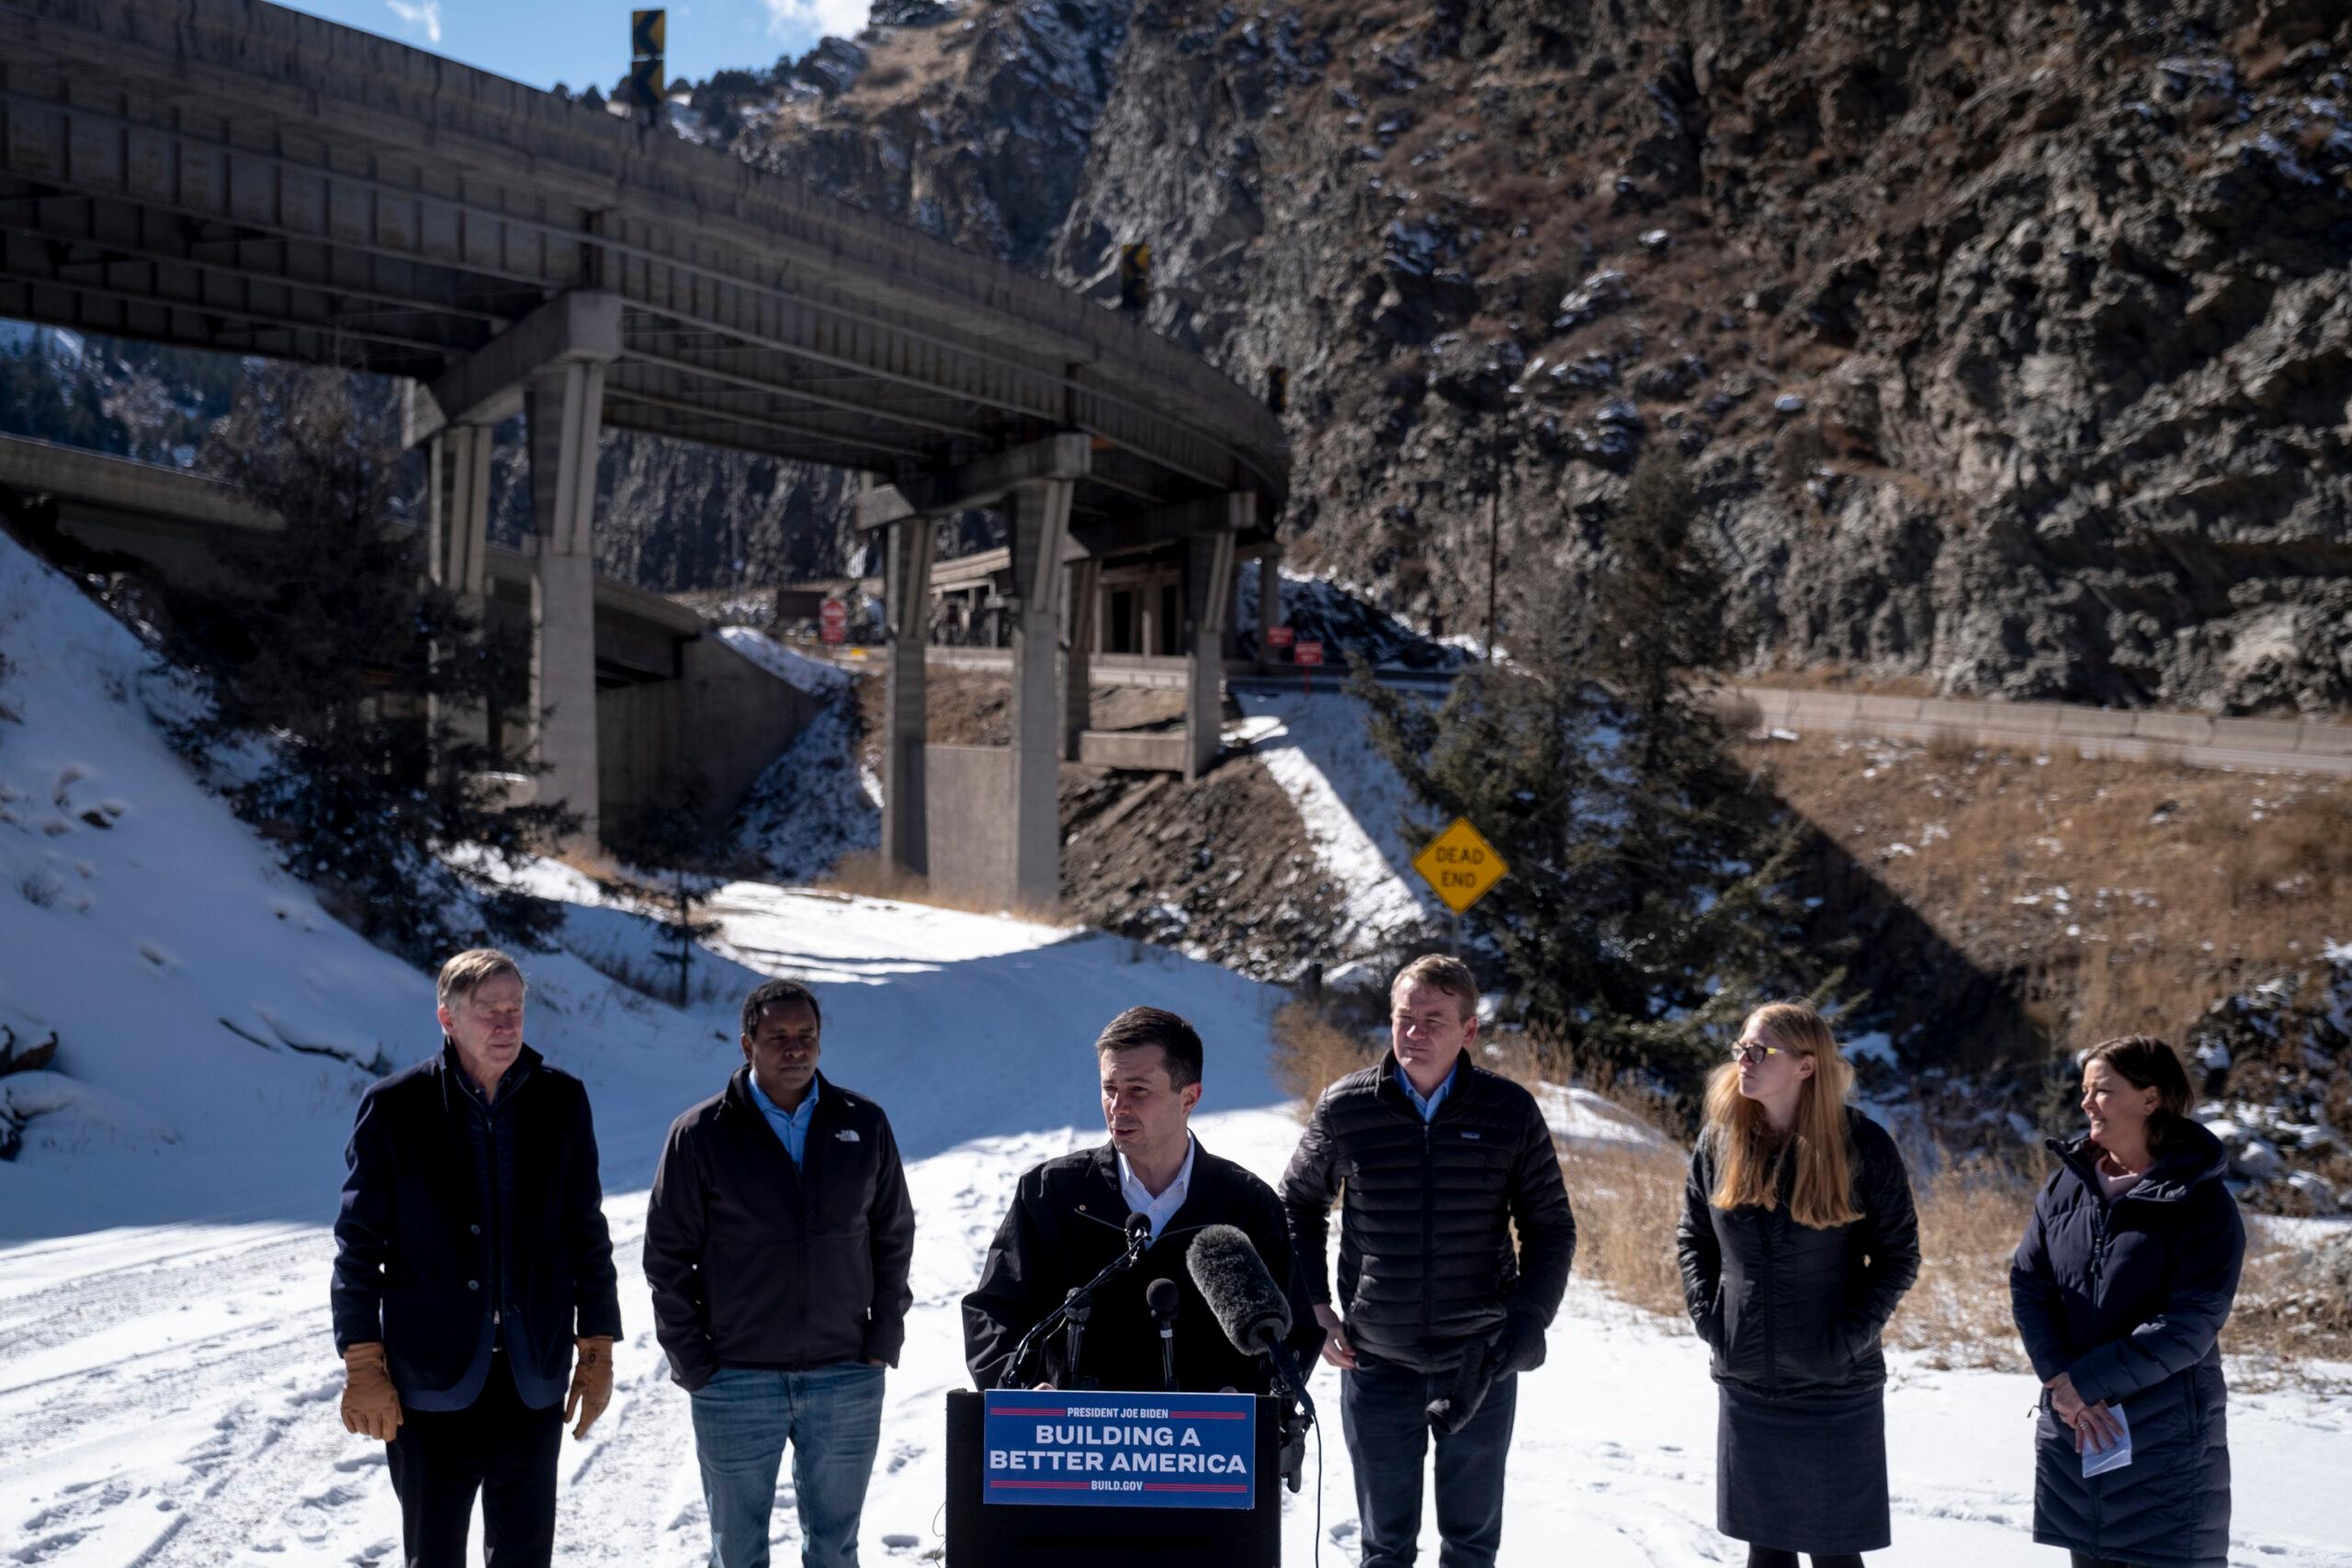 U.S. Transportation Sec. Pete Buttigieg discusses an Interstate 70 expansion project at Floyd Hill during a press conference with other Colorado leaders in Idaho Springs on Thursday, February 24, 2022. From left, Sec. Buttegieg is accompanied by Sen. John Hickenlooper, Rep. Joe Neguse, Sen. Michael Bennet, Colorado Department of Transportation executive director Shoshana Lew, and I-70 Coalition director Margaret Bowes. Gov. Jared Polis later joined.